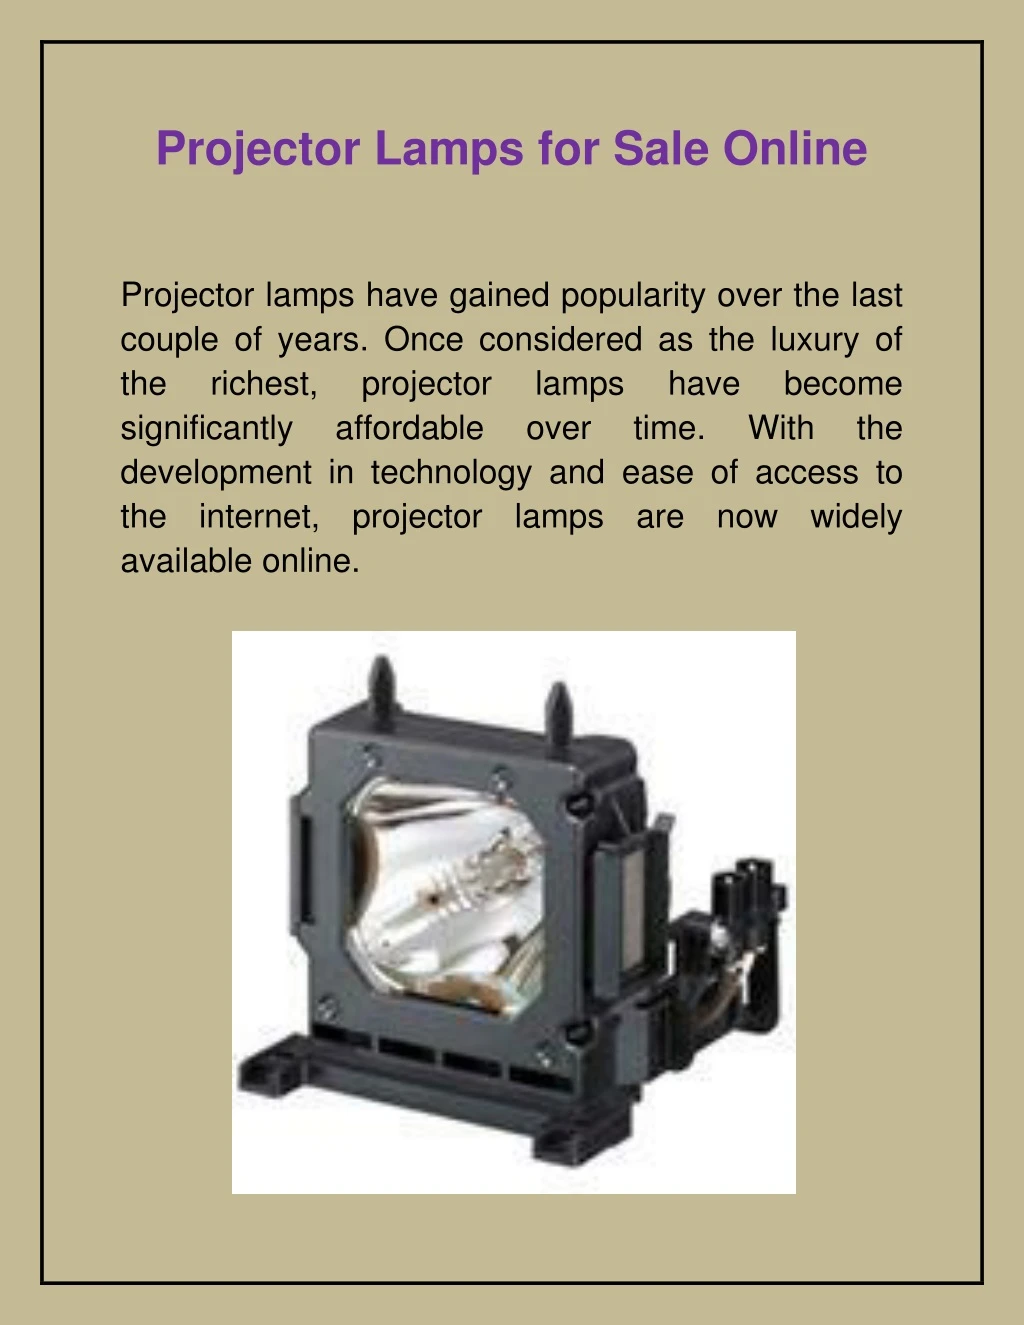 projector lamps for sale online